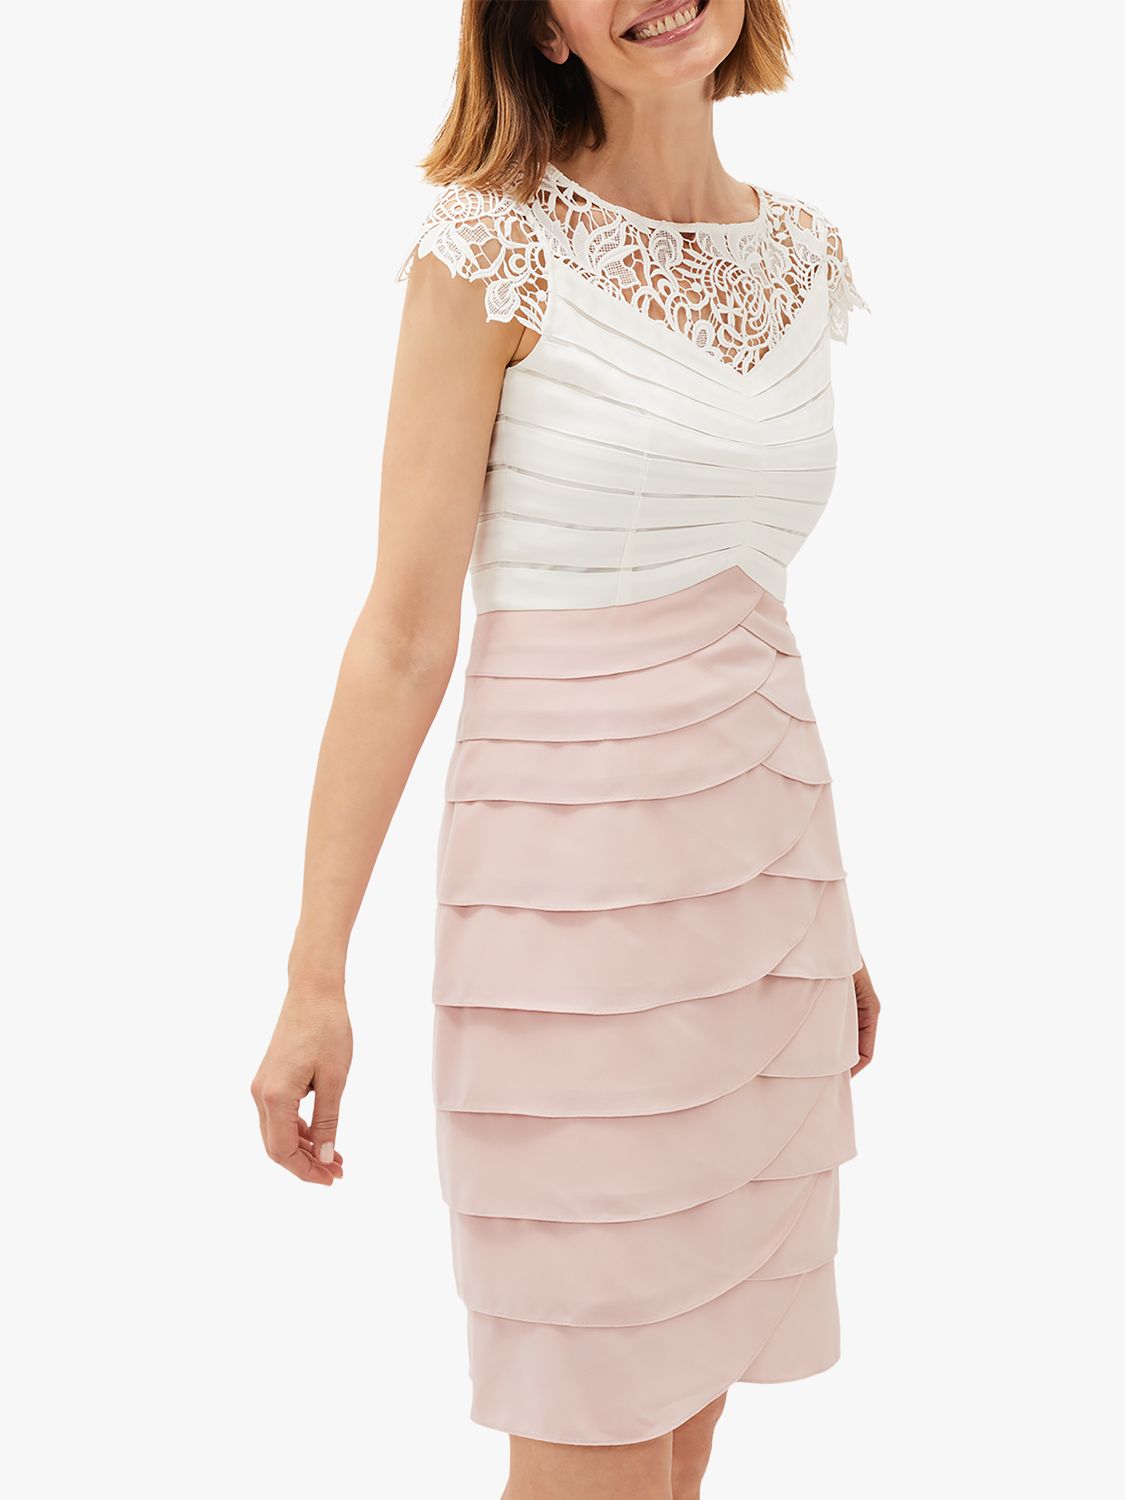 Phase Eight Faith Contrast Lace Dress, Ivory/Antique Rose, 8